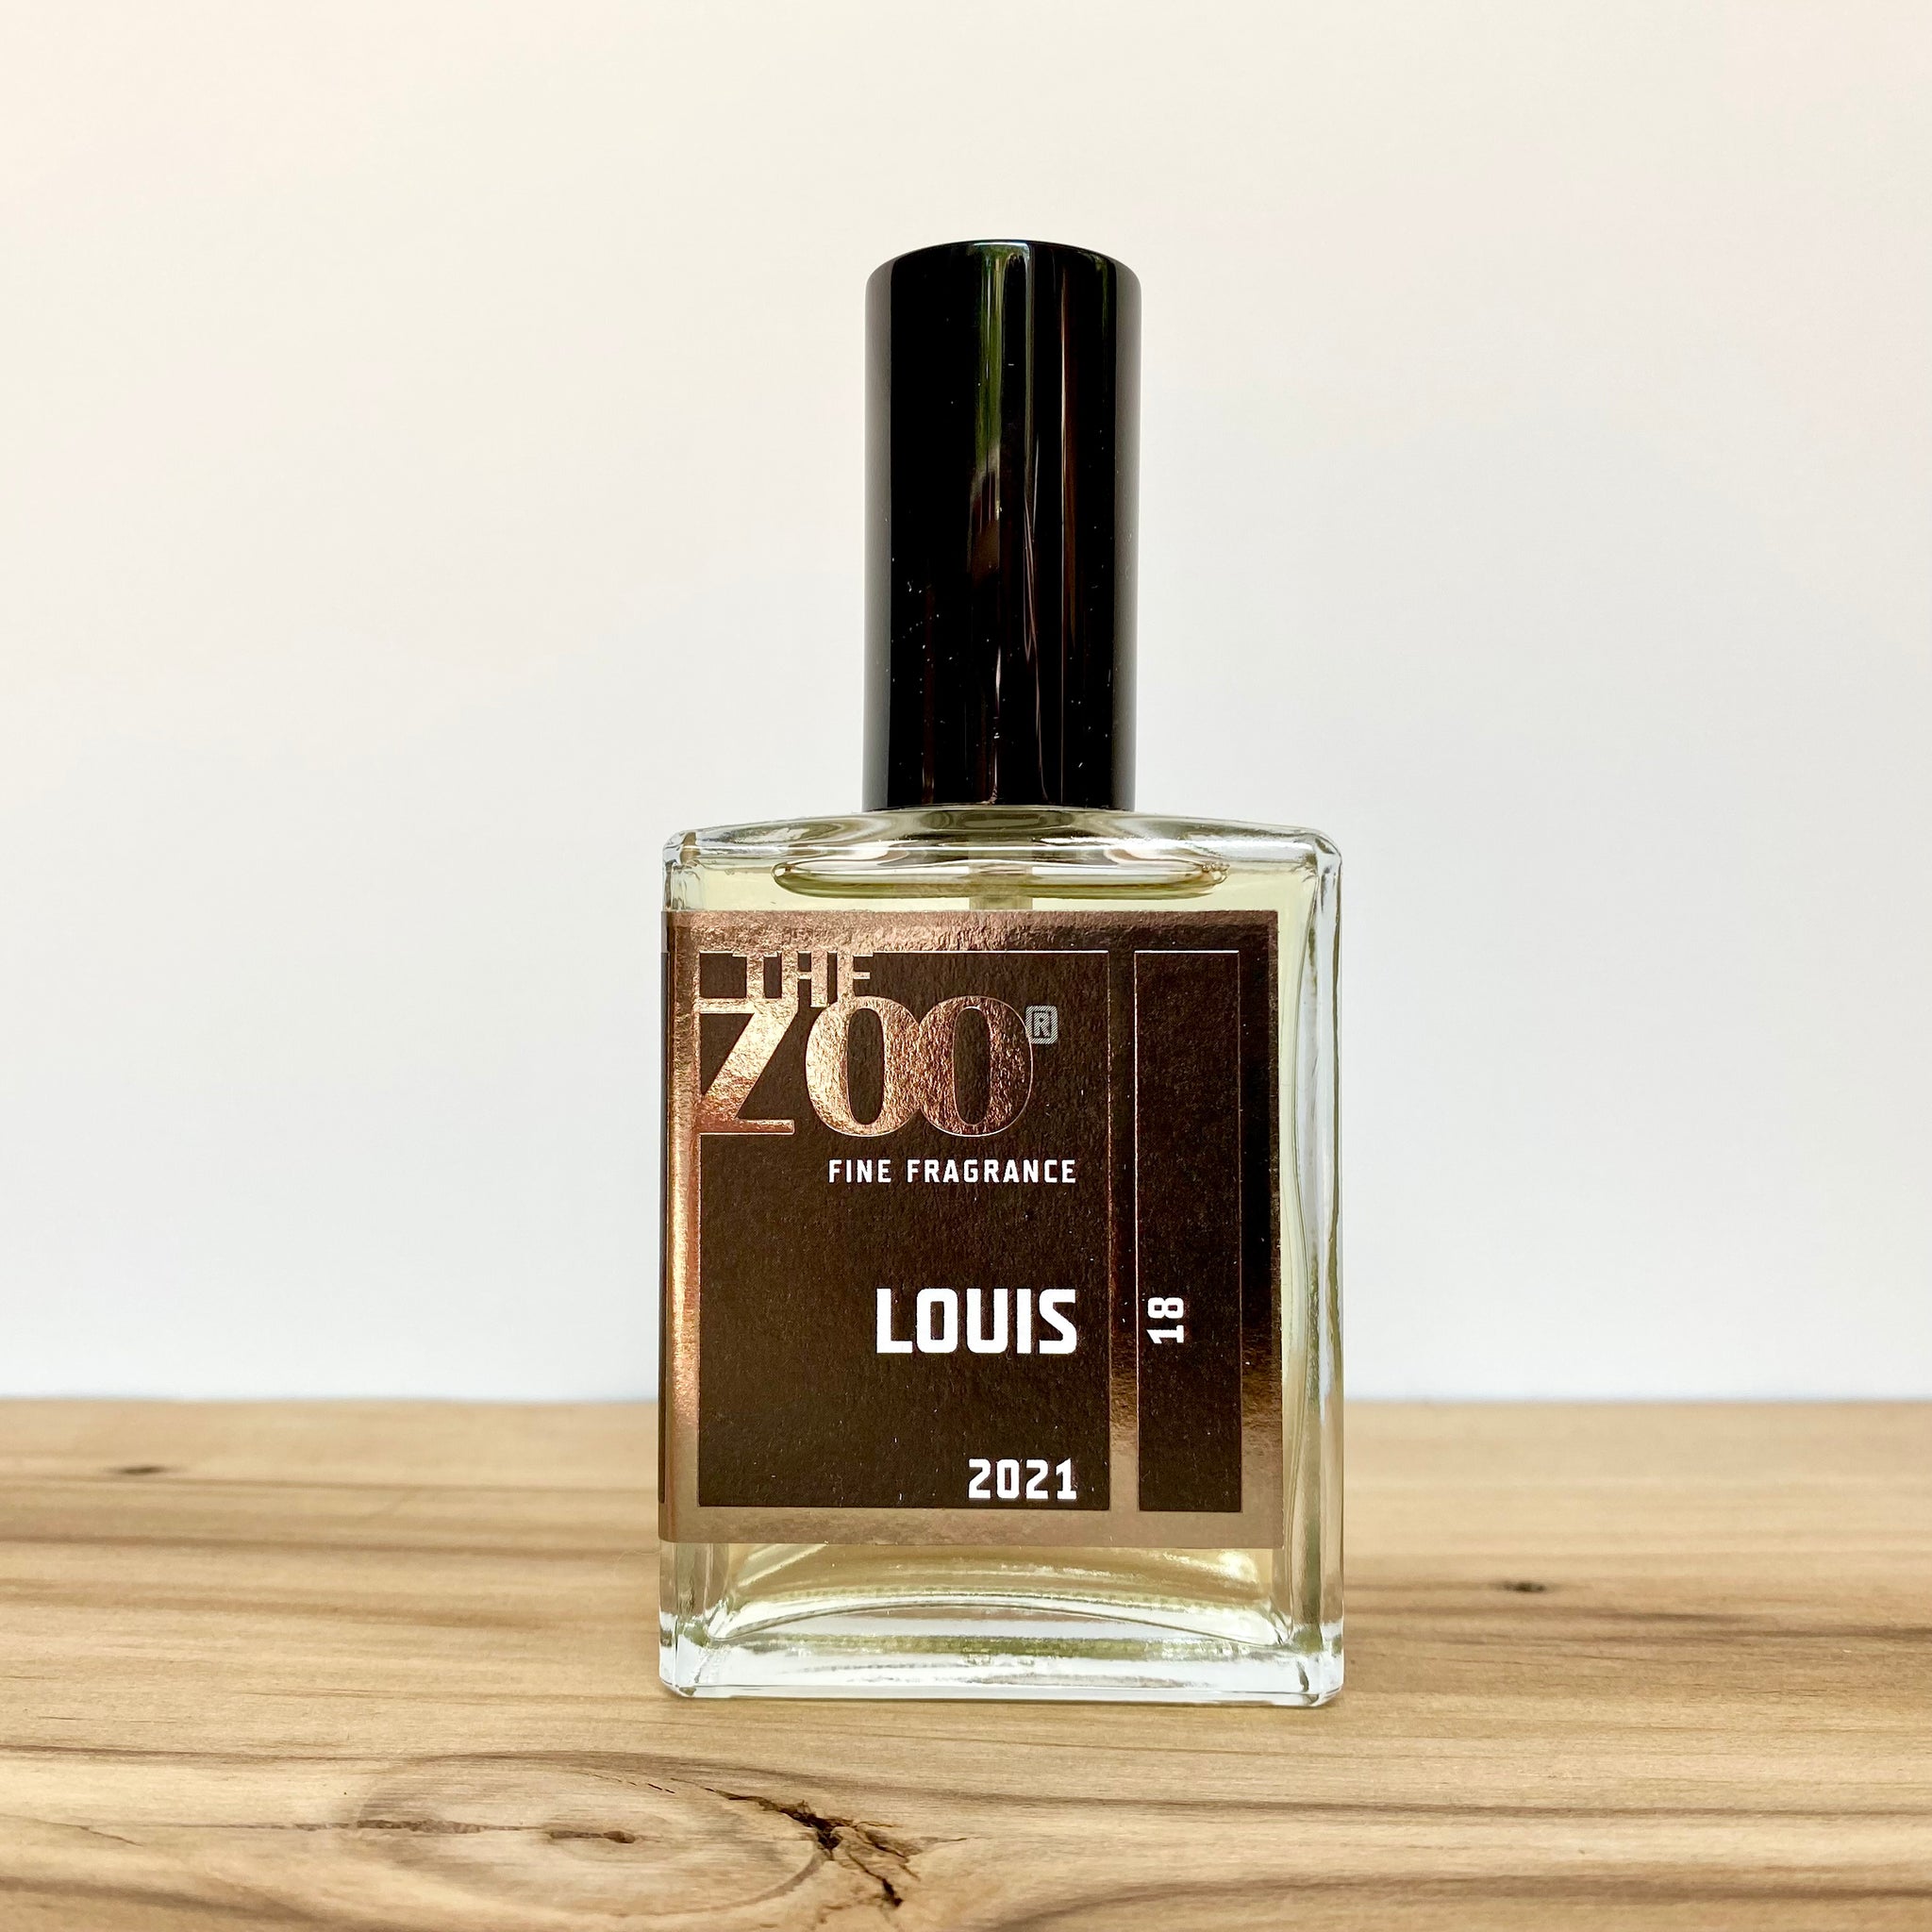 Thoughts on Louis Vuitton fragrances? : r/fragrance